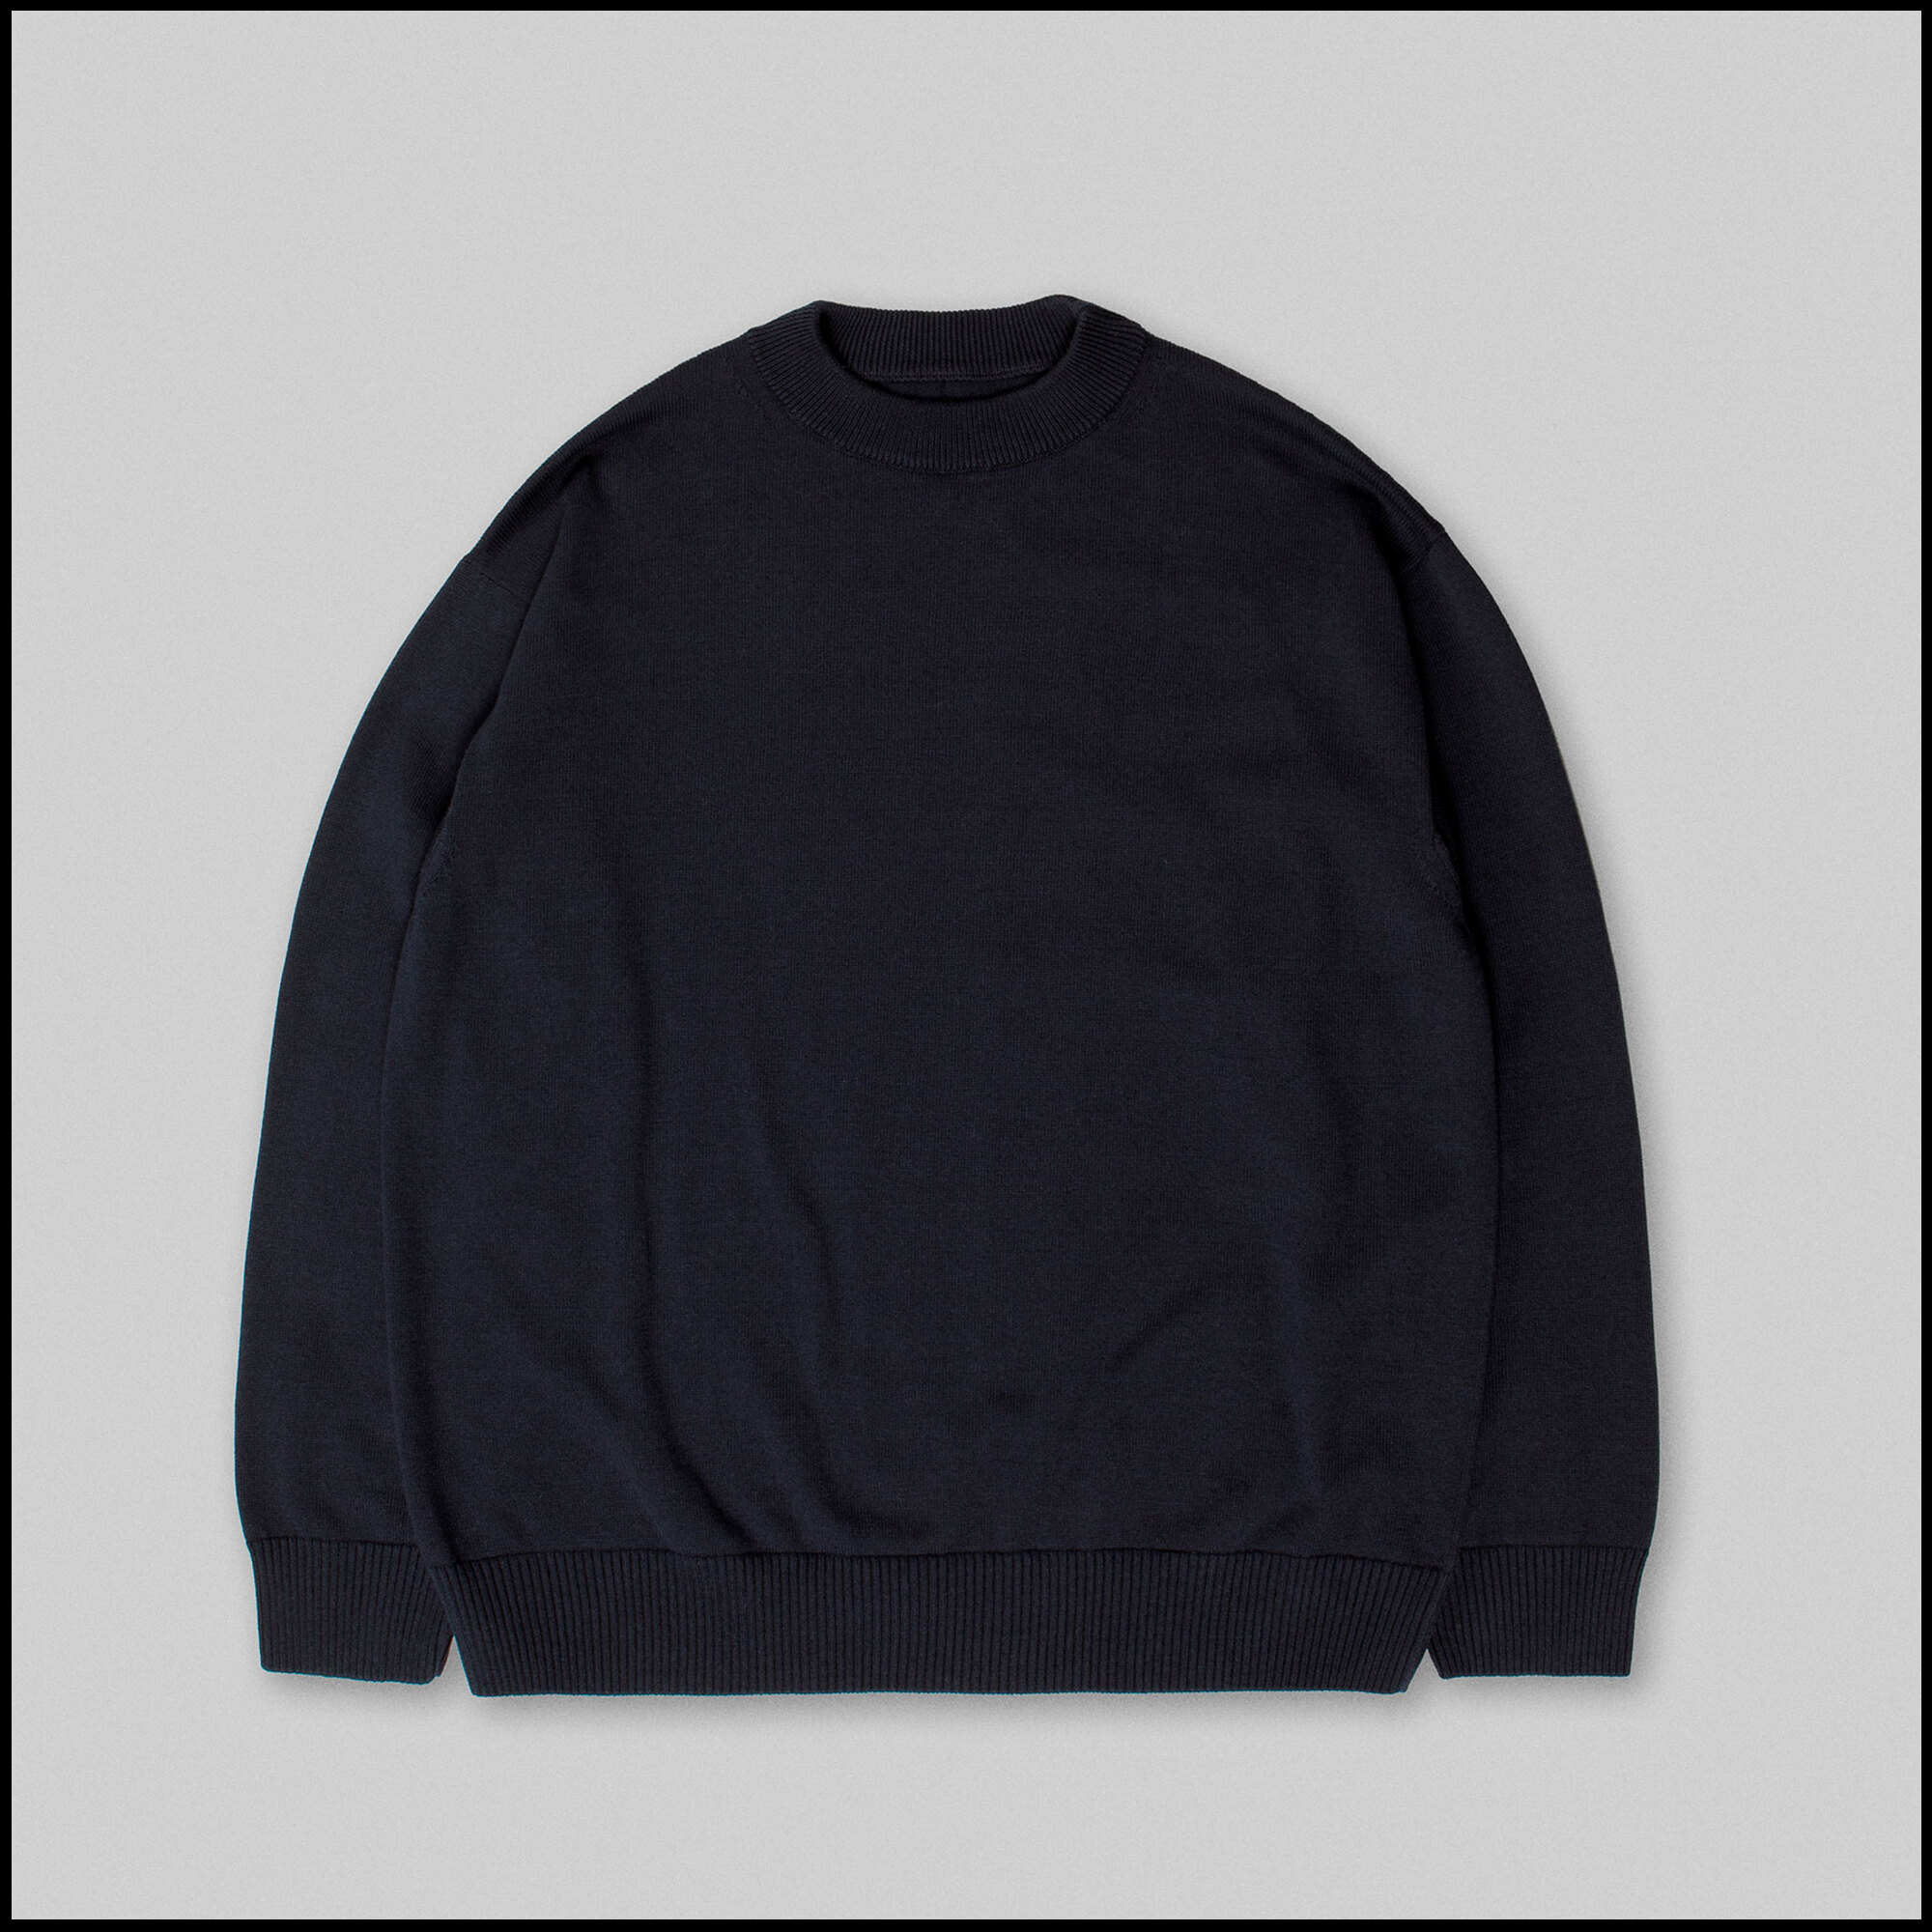 STANDARD sweater by Arpenteur in Midnight blue color